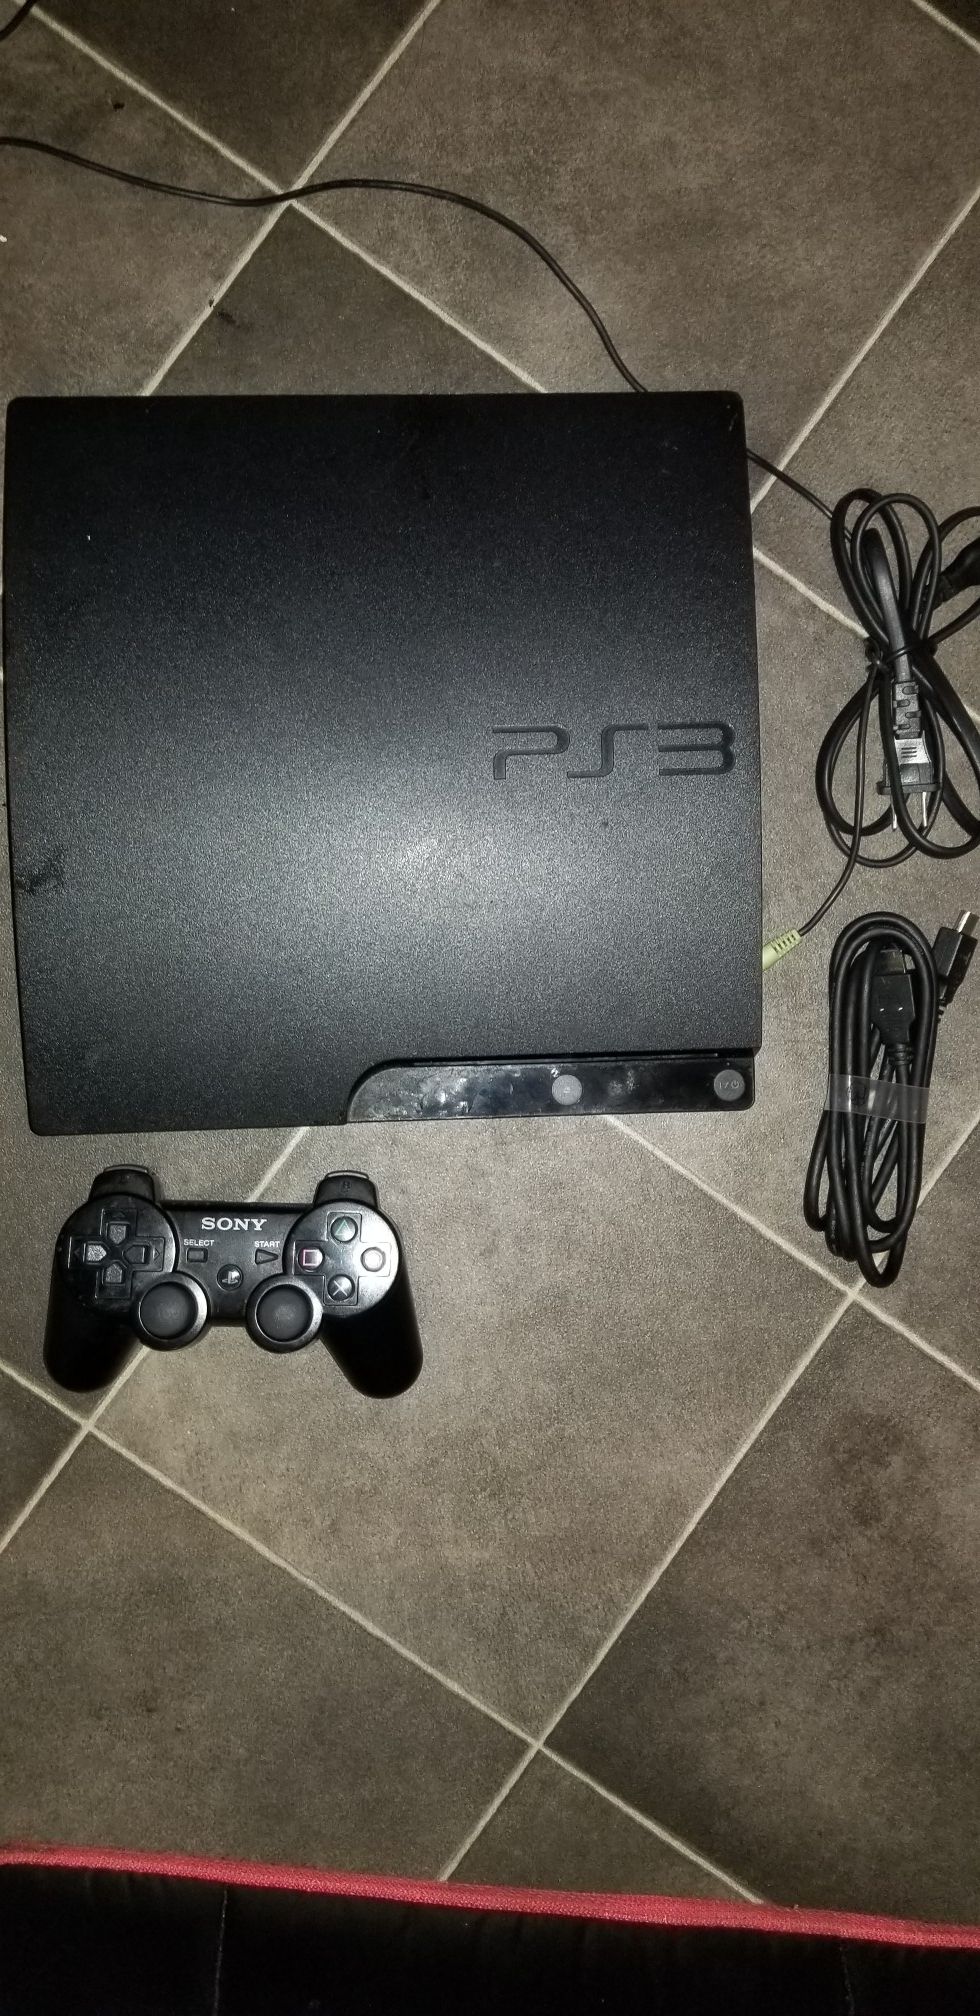 A PS3 with 1 controller